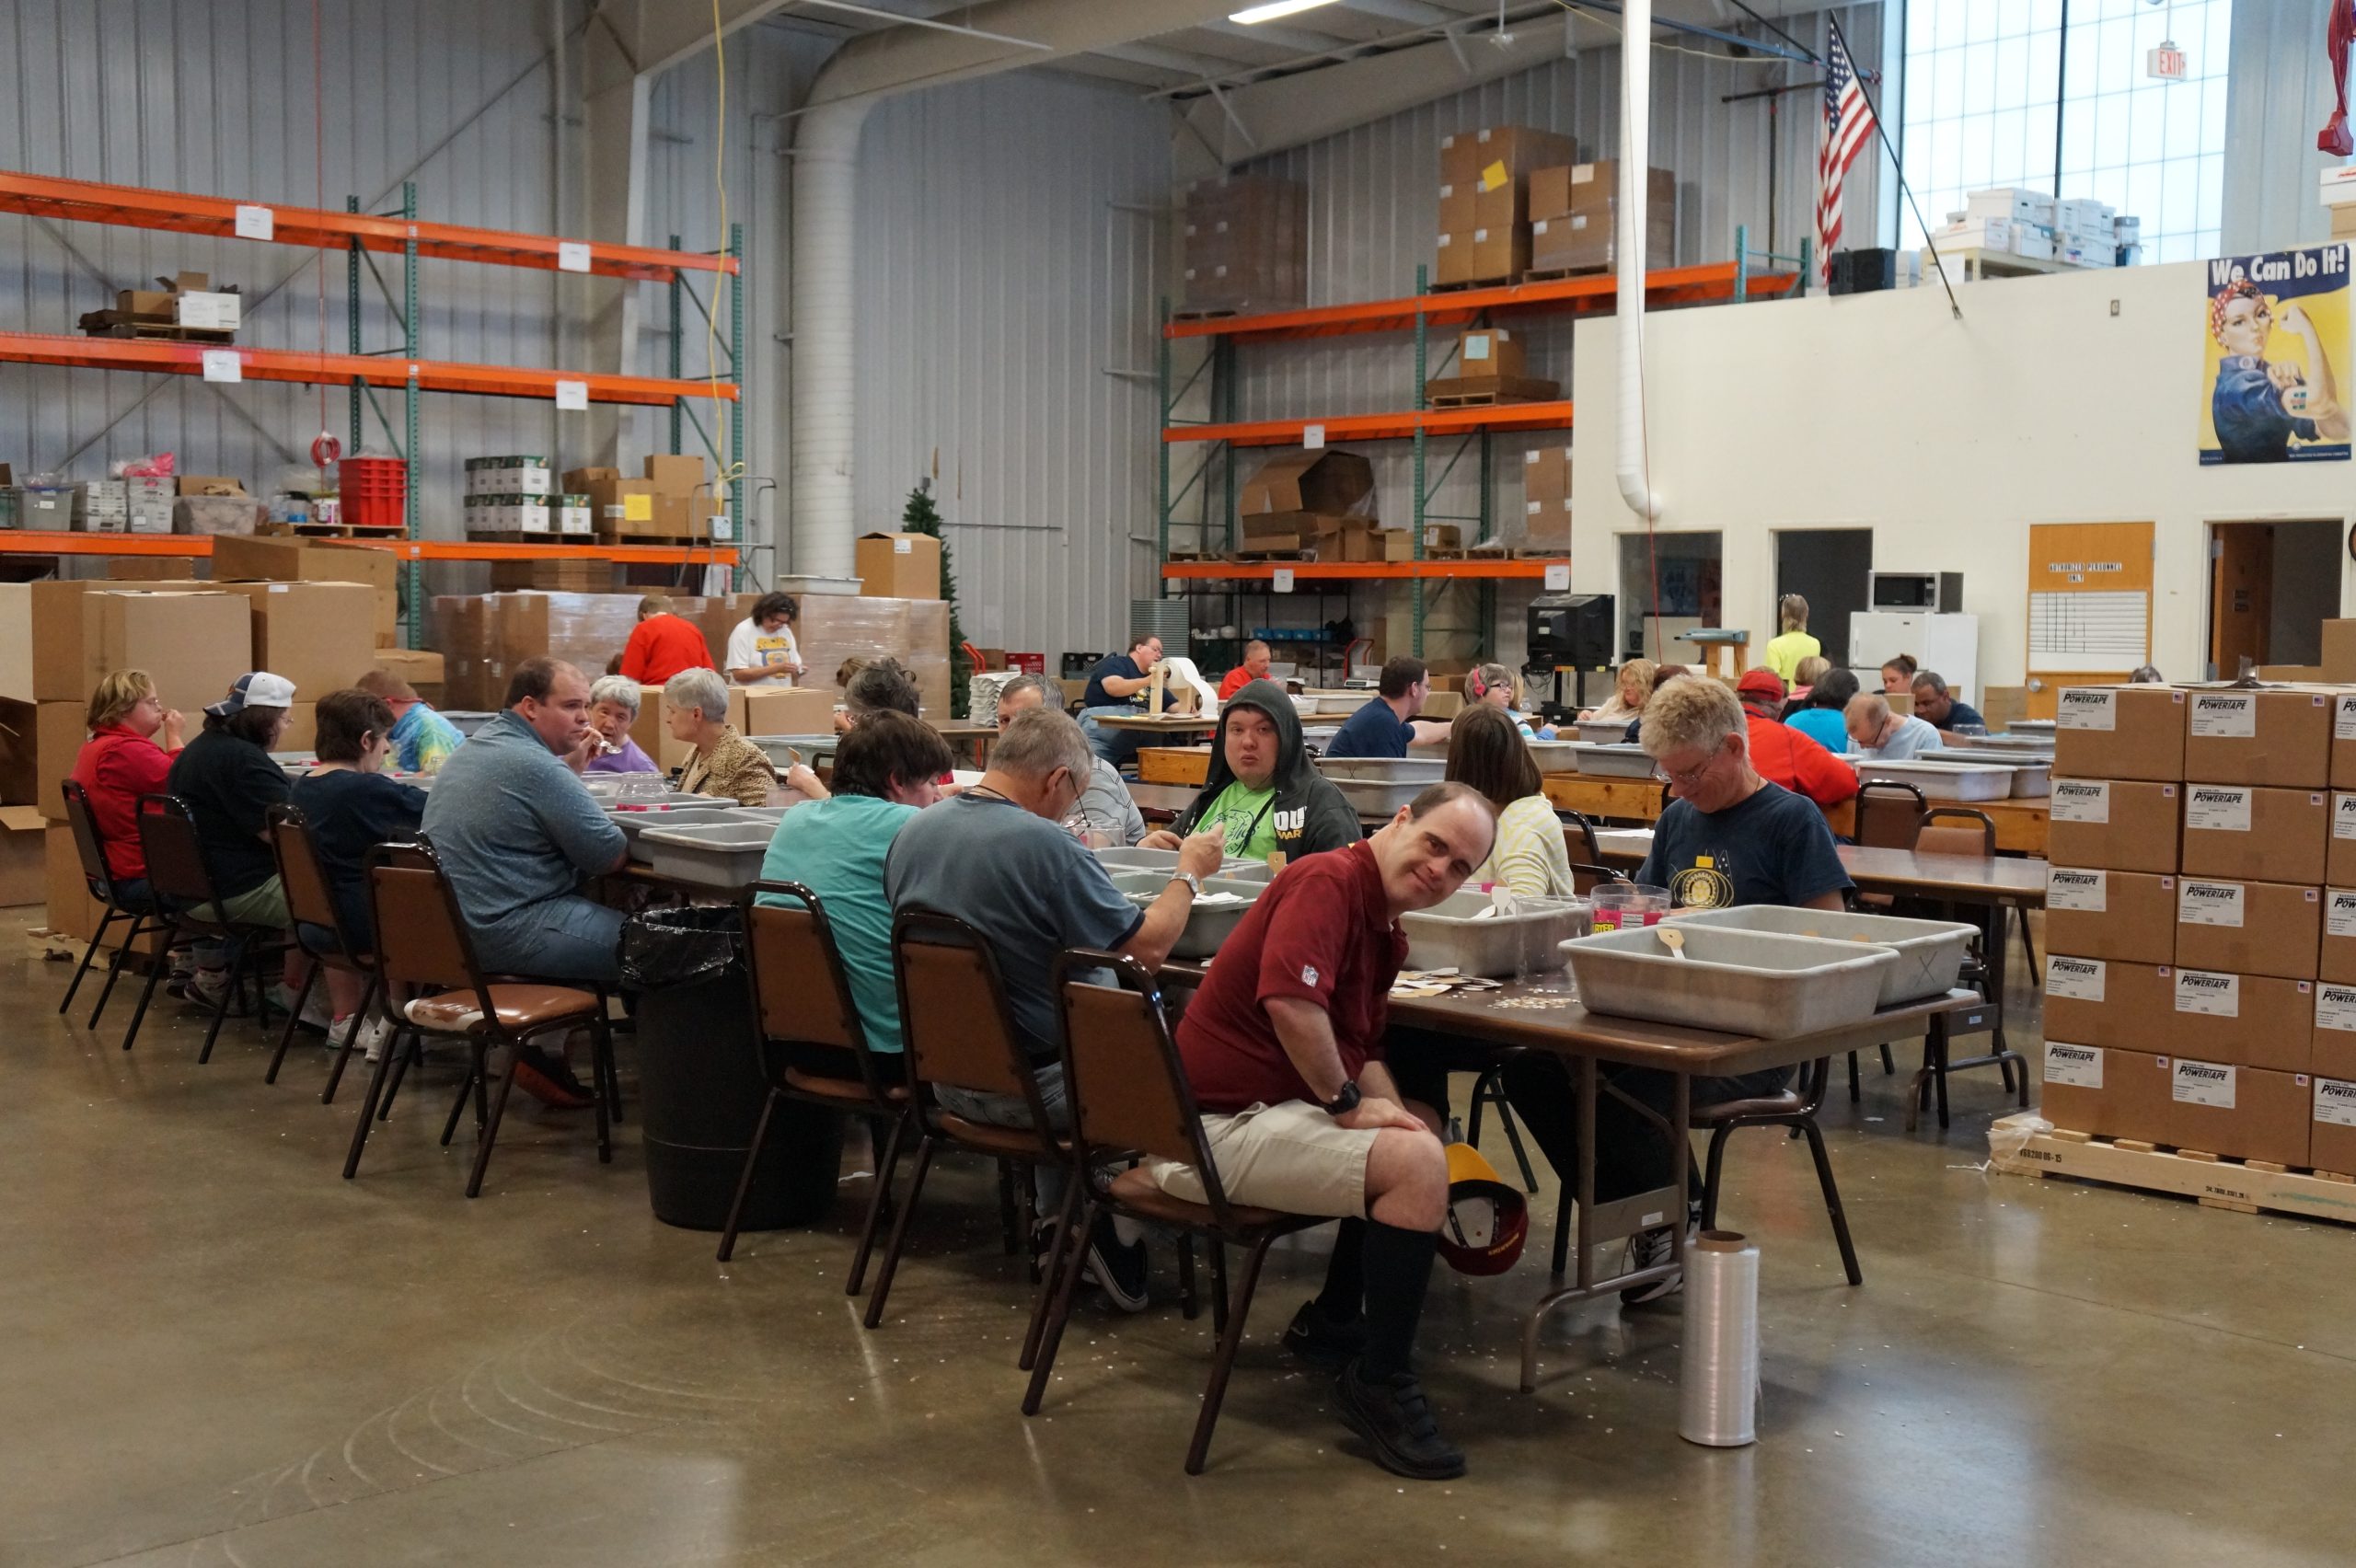 Group in warehouse workshop sitting at table.